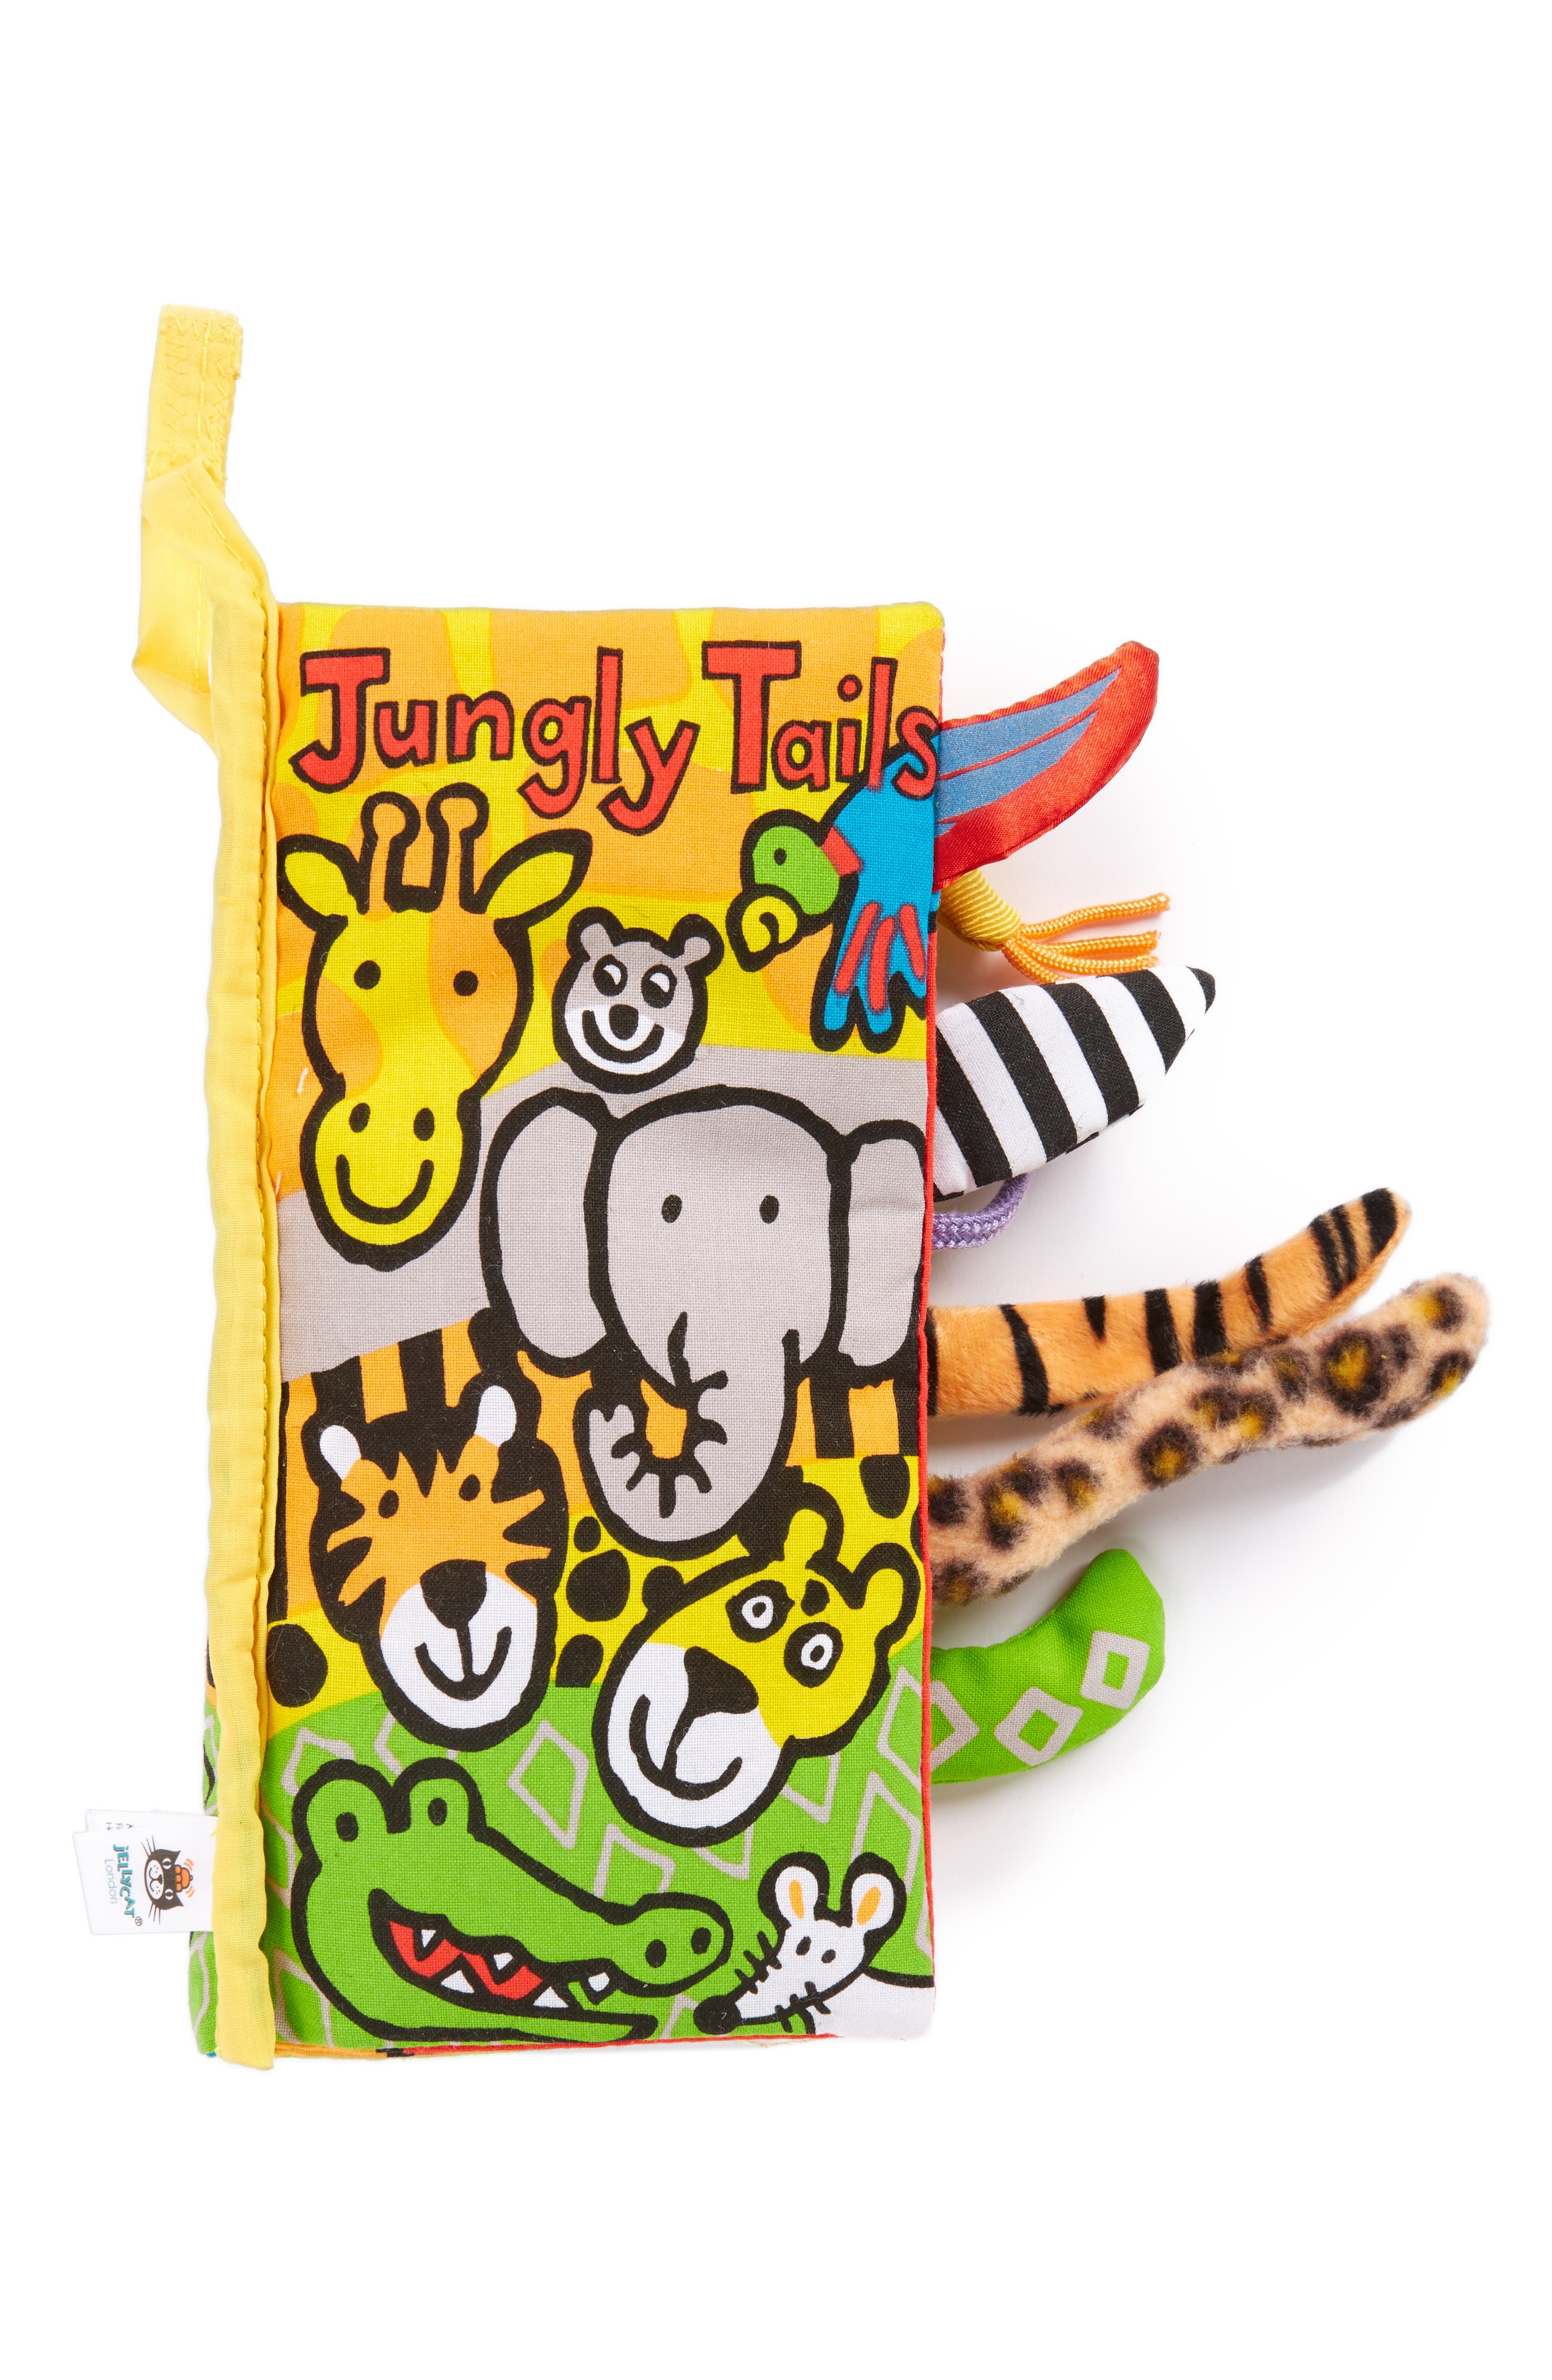 jungly tails book